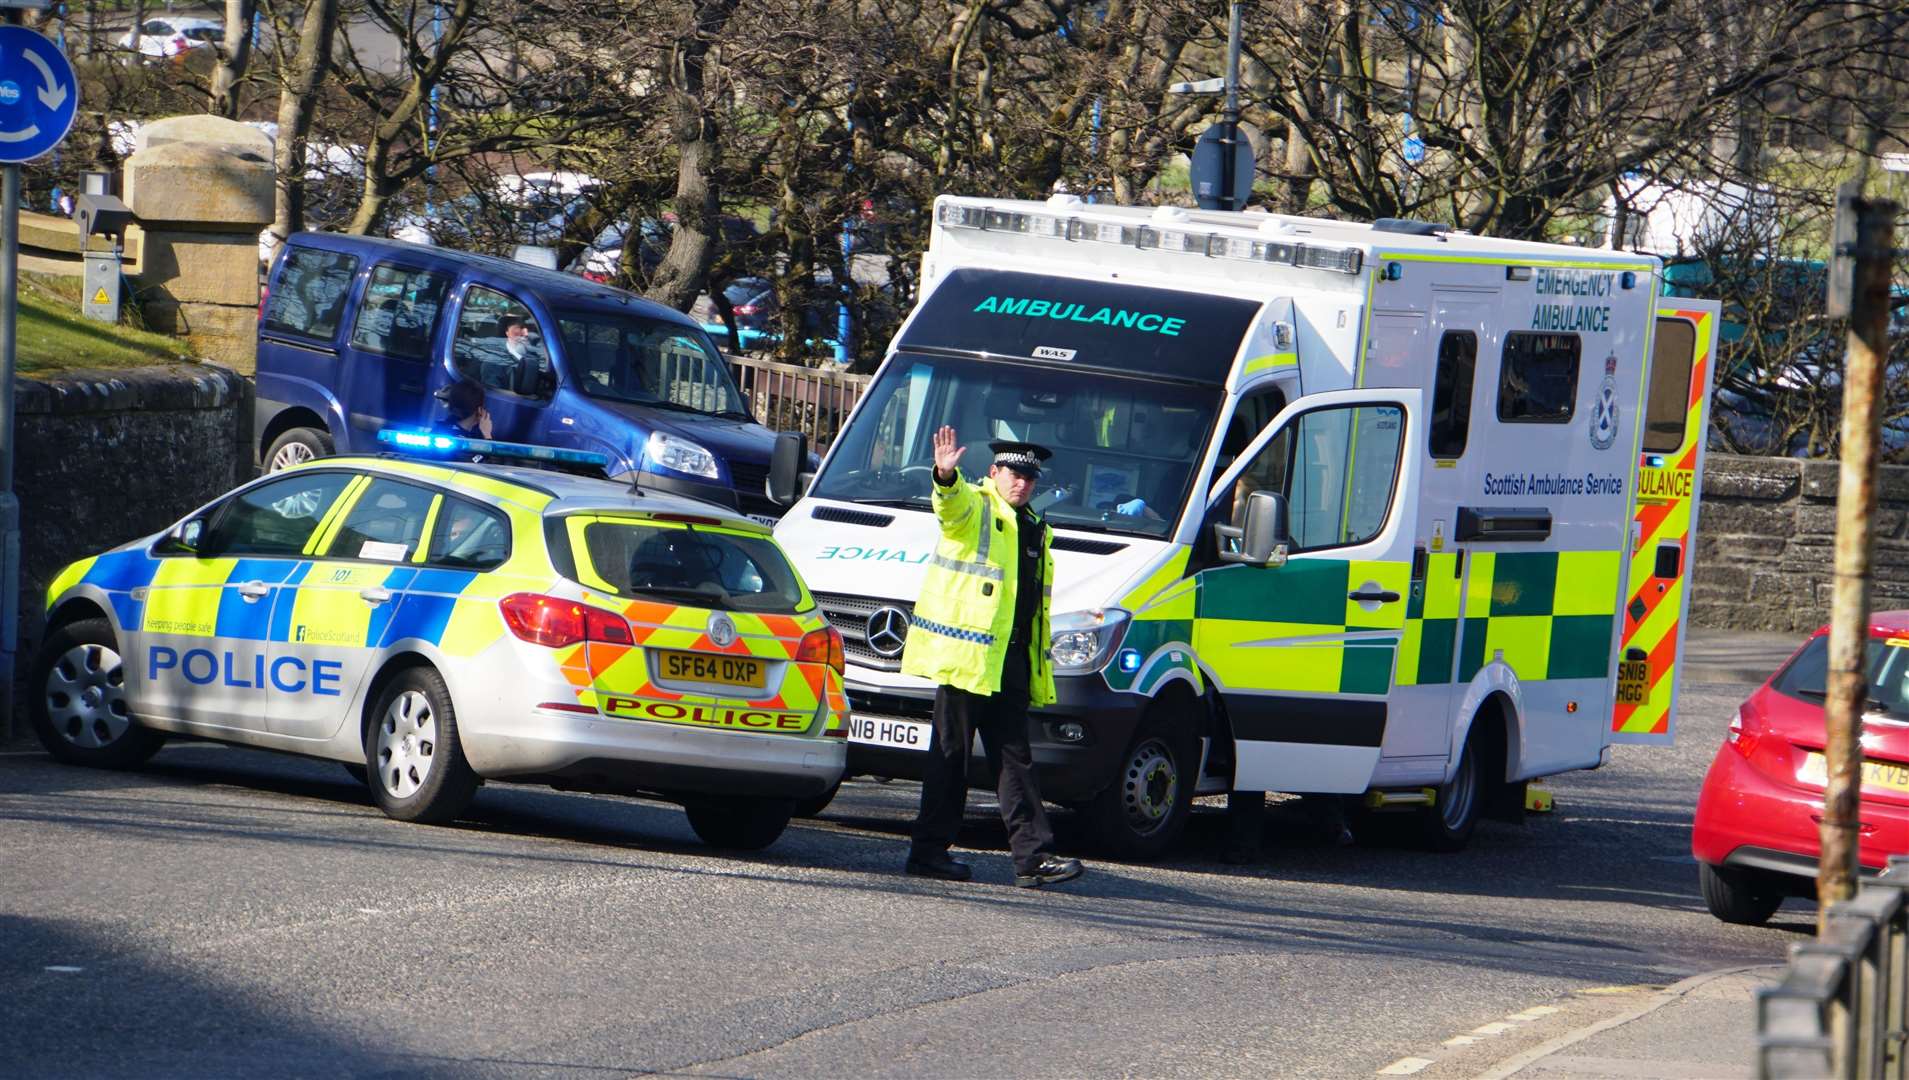 Police and ambulance attend to the injured man near the war memorial in Wick.